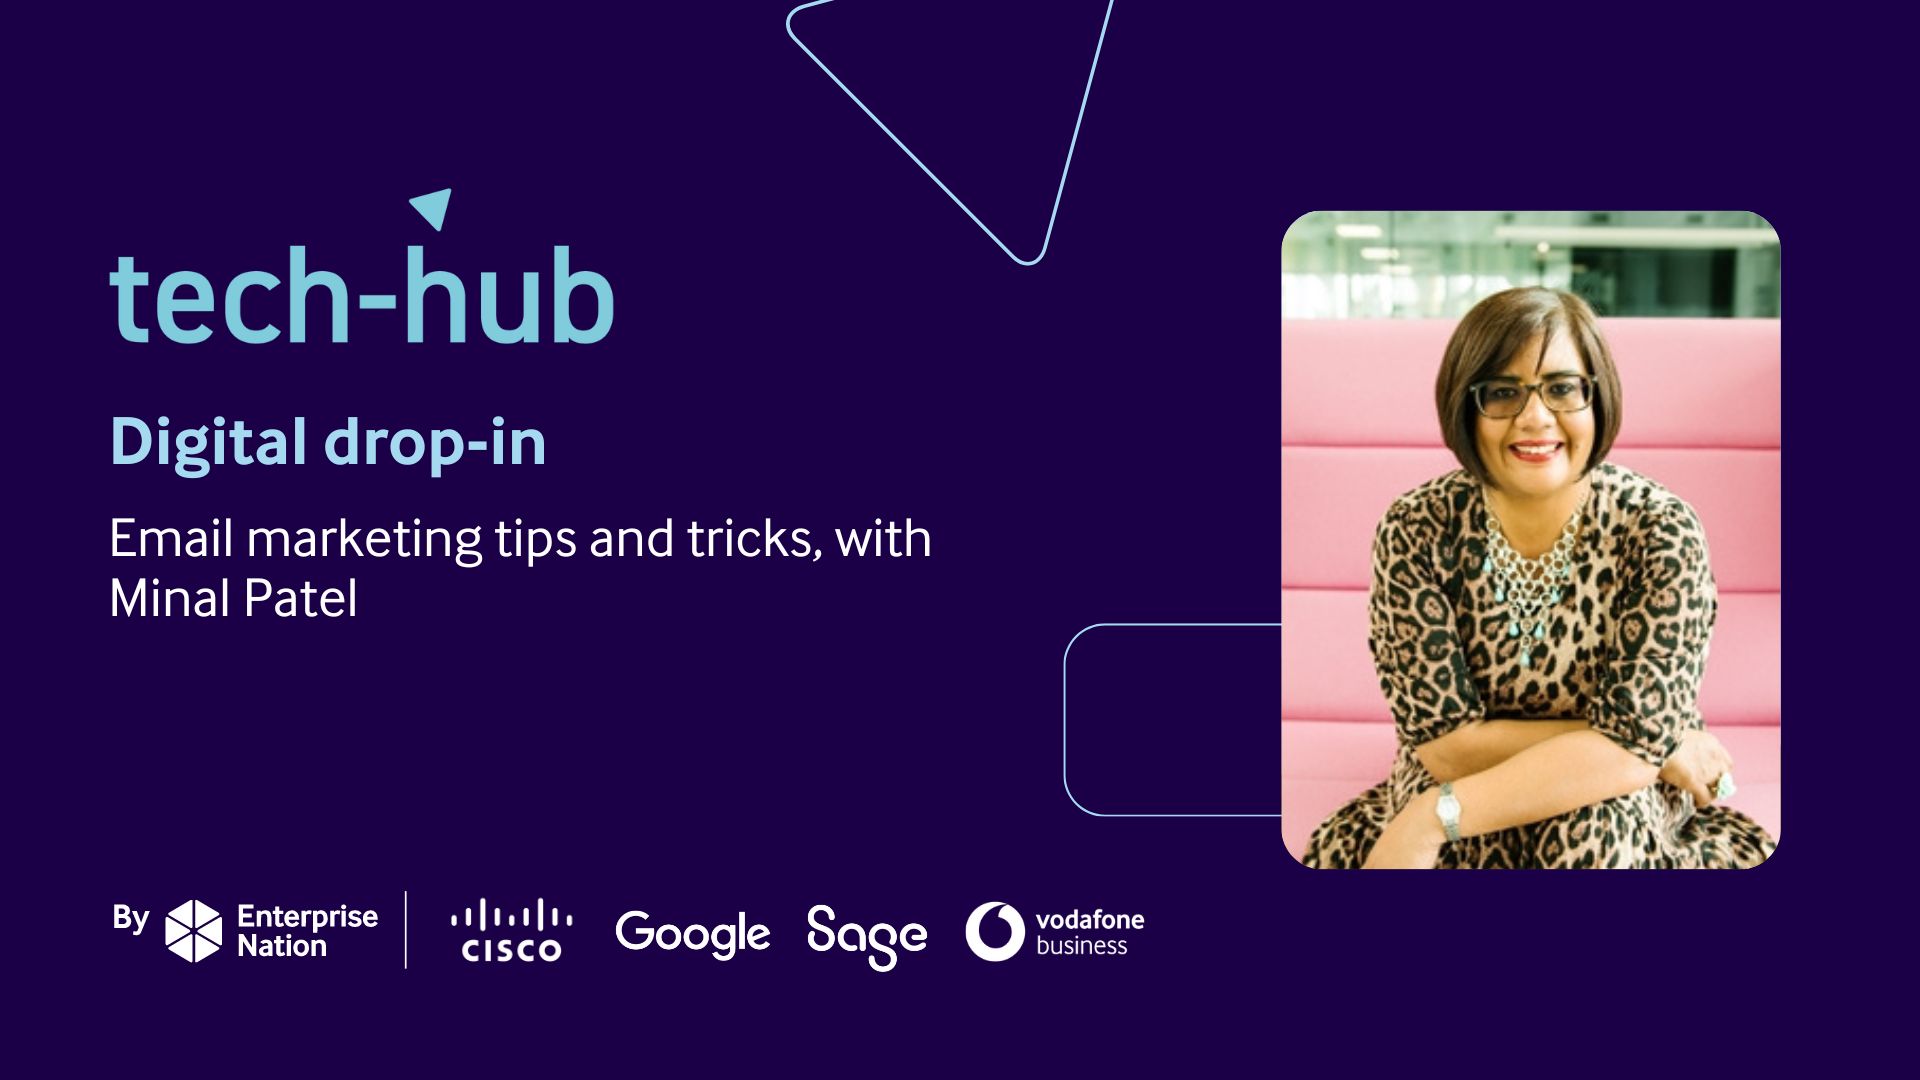 Tech Hub digital drop-in: Email marketing tips and tricks